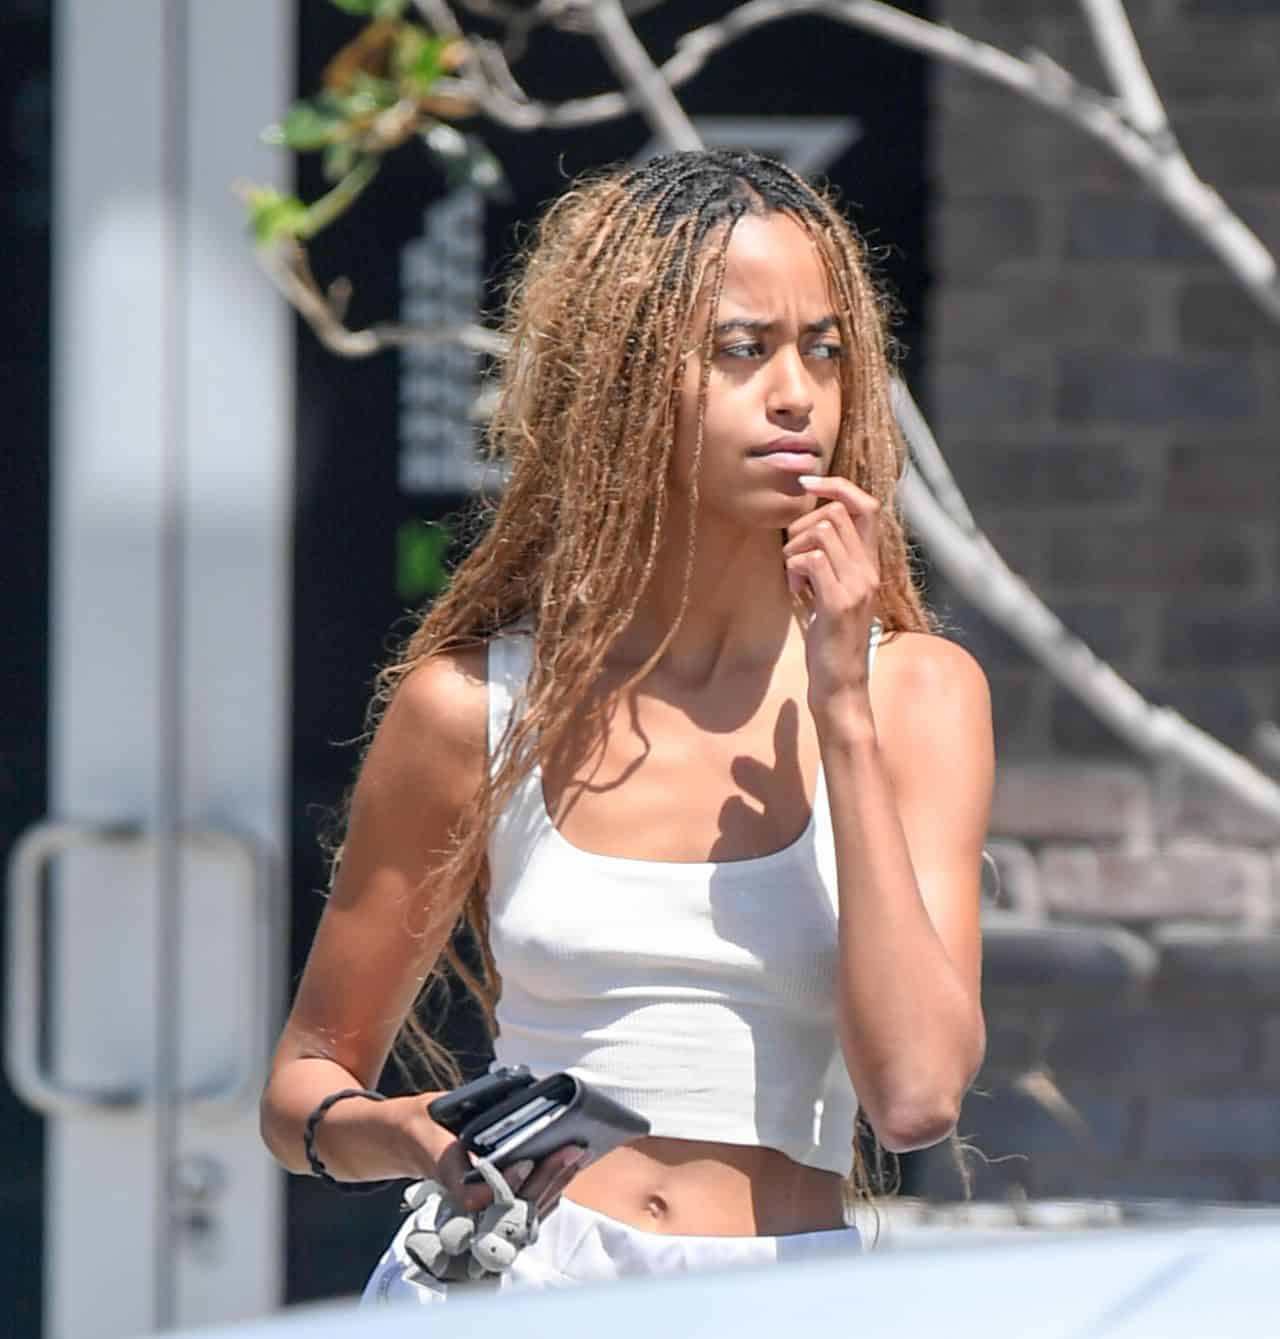 Malia Obama Shows Off Her Figure in Tiny White Shorts and a Skimpy Crop Top